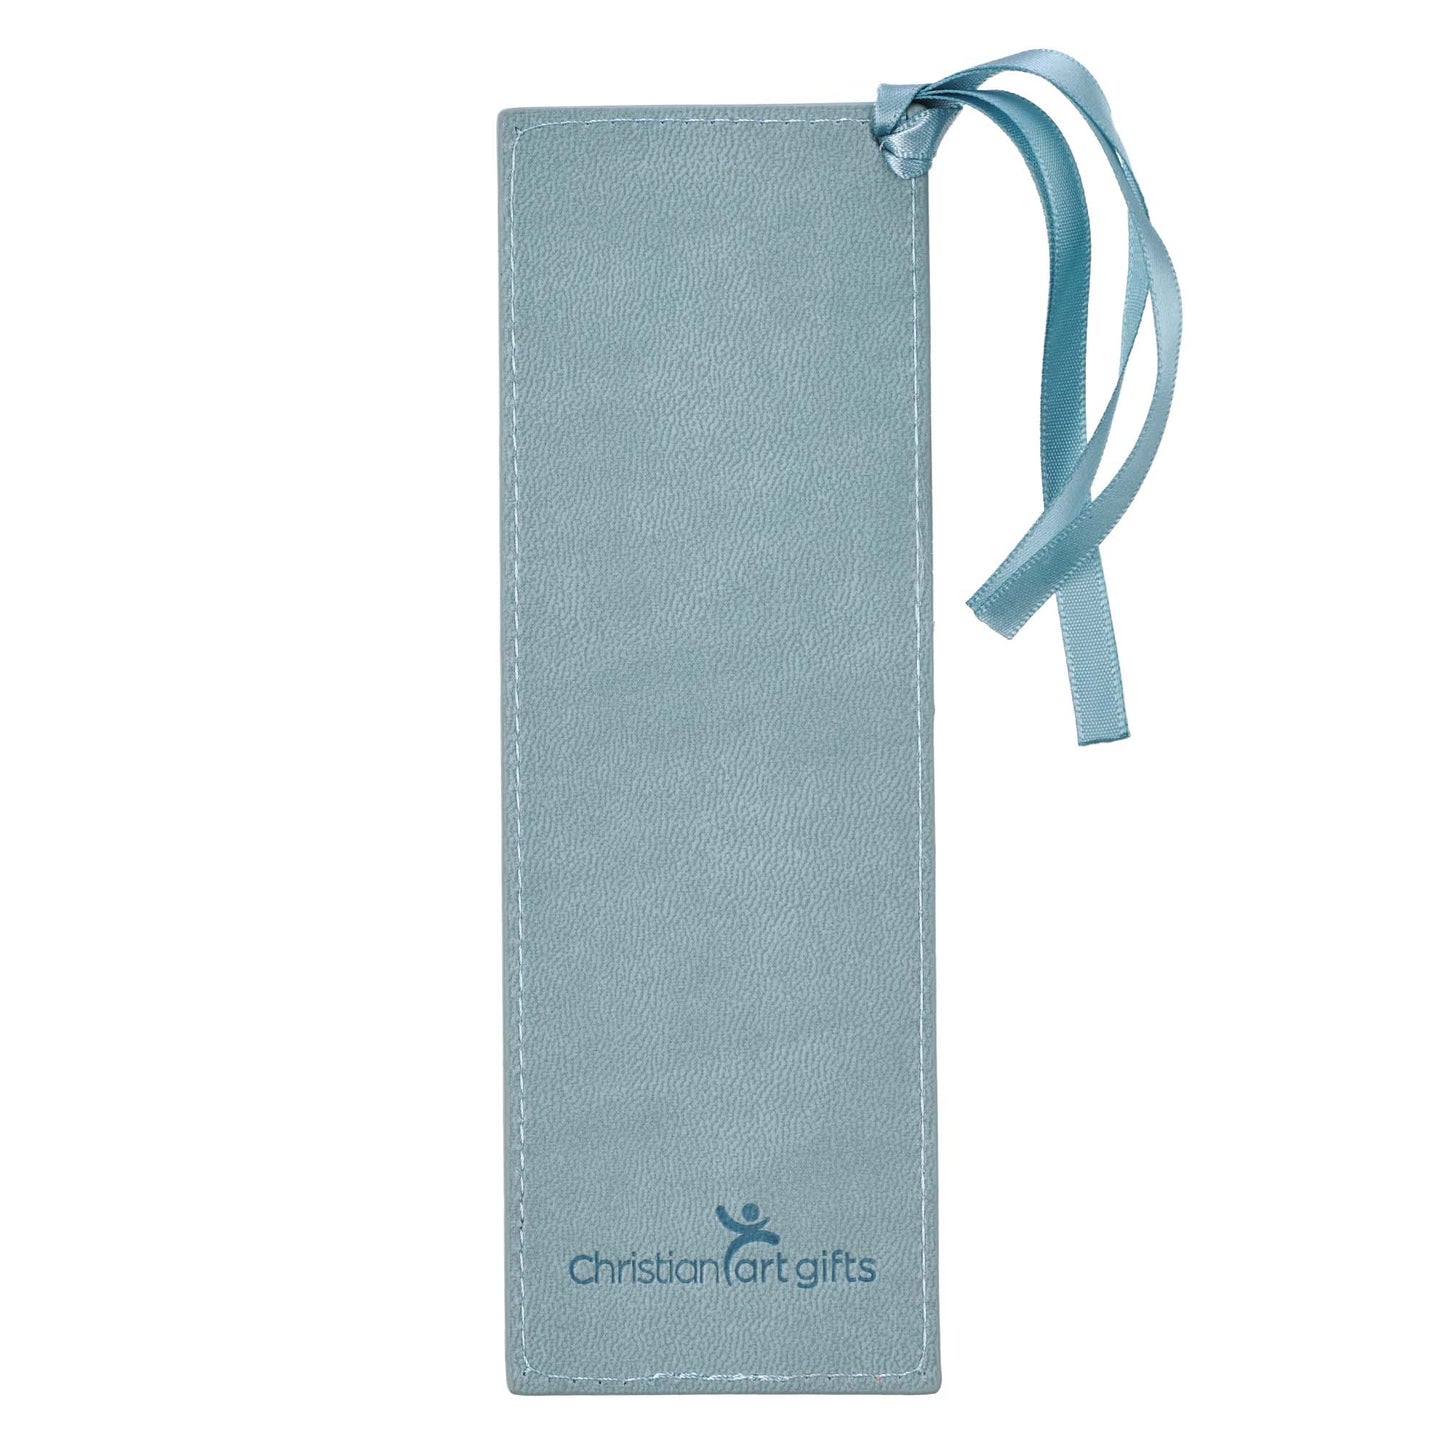 Hope & a Future Powder Blue Faux Leather Bookmark - Jeremiah 29:11 - The Christian Gift Company